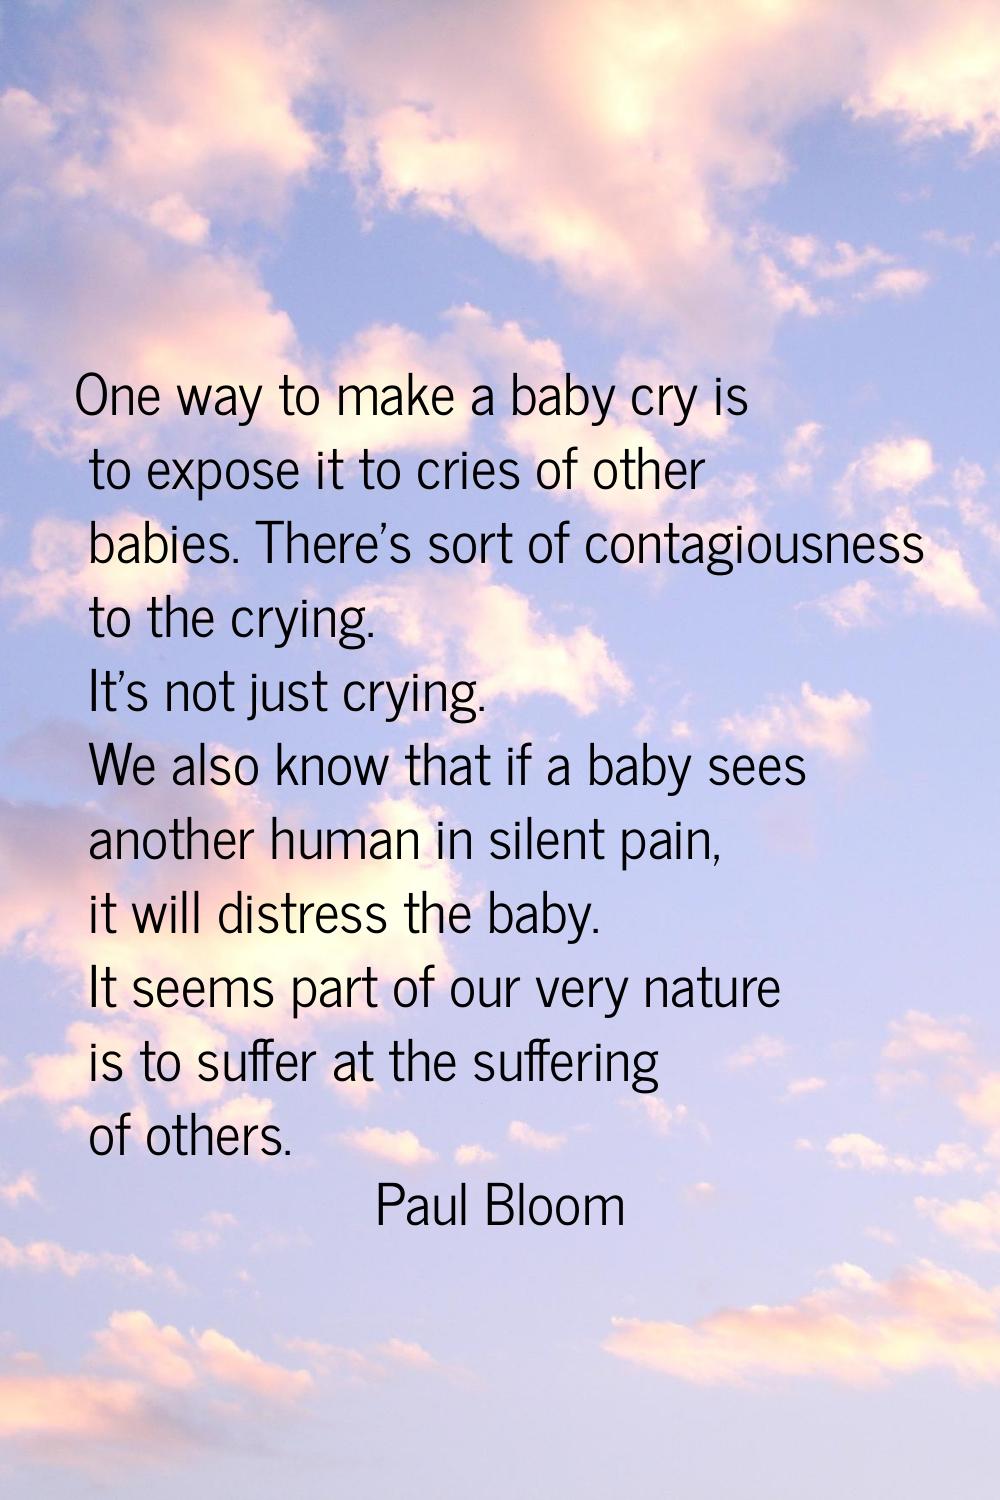 One way to make a baby cry is to expose it to cries of other babies. There's sort of contagiousness